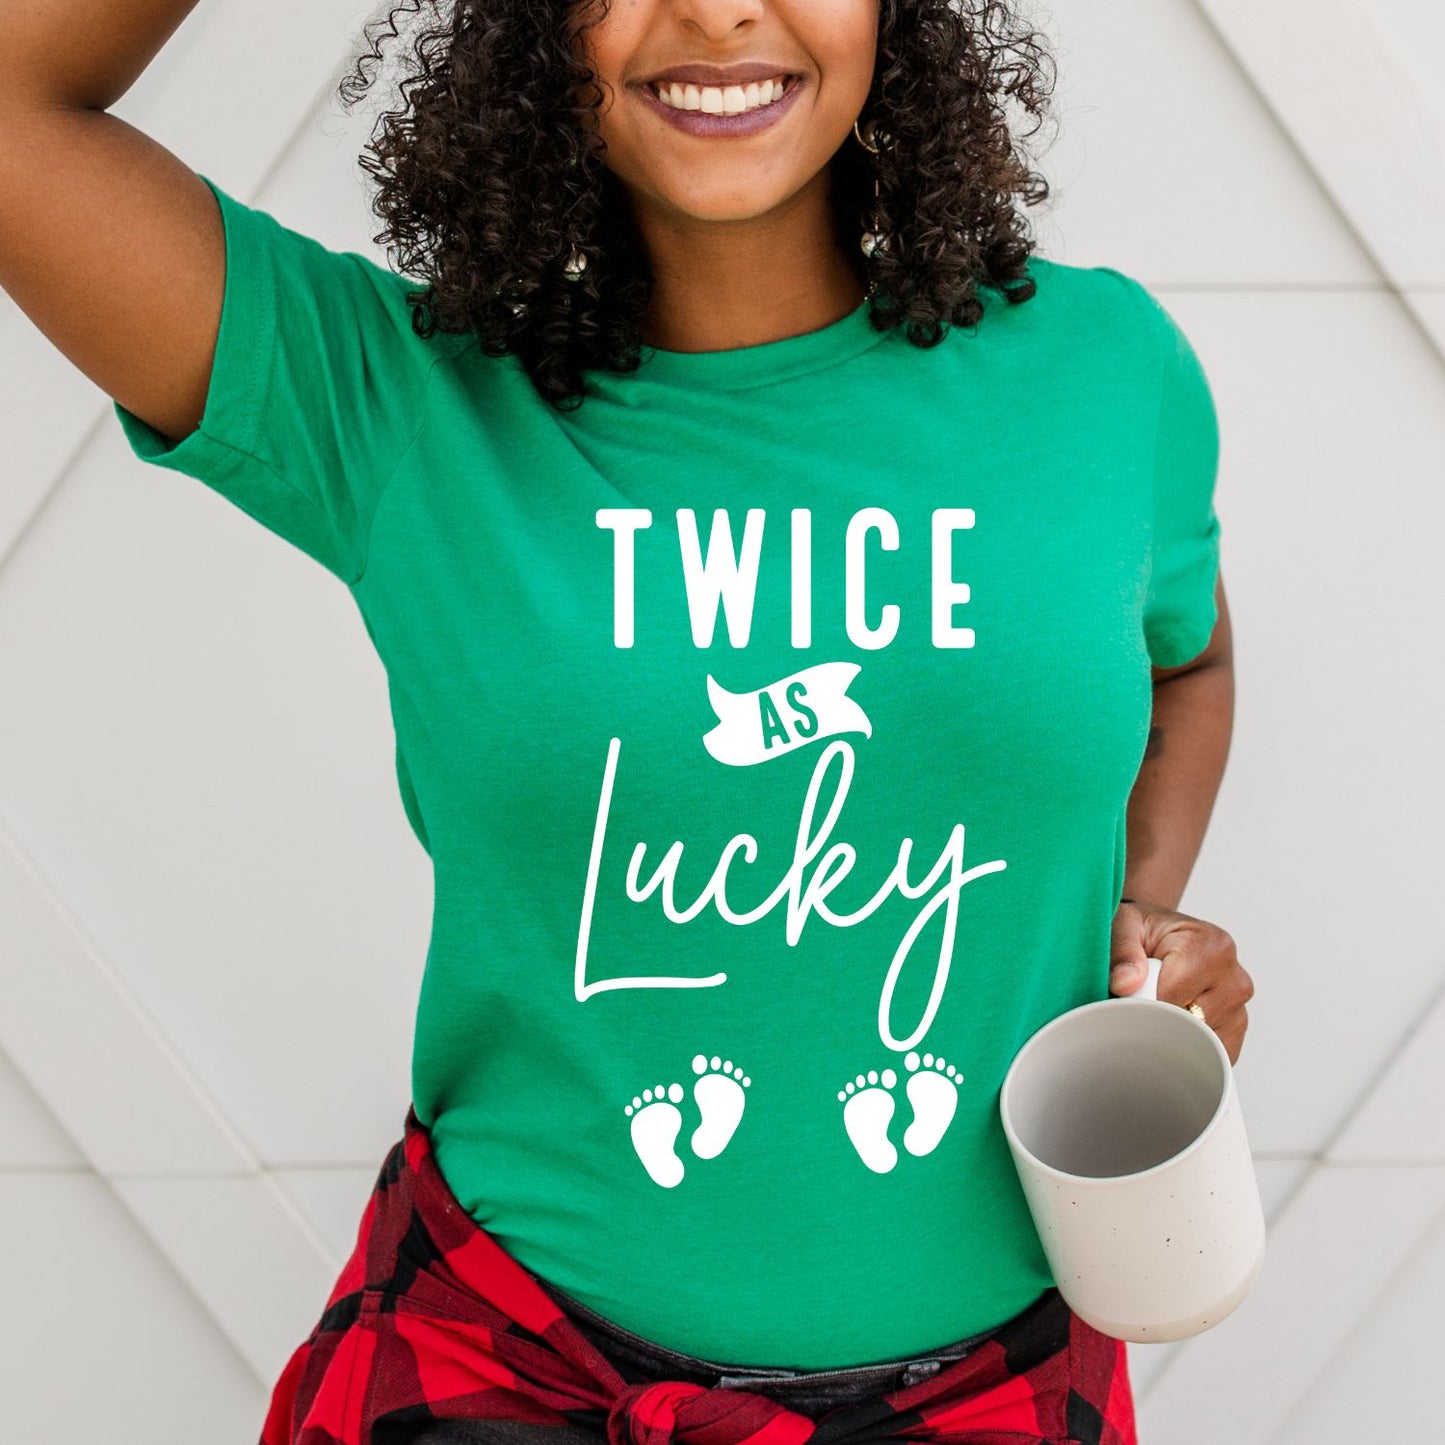 Twice as Lucky - St. Paddy's Day - Twin Pregnancy Announcement Shirt